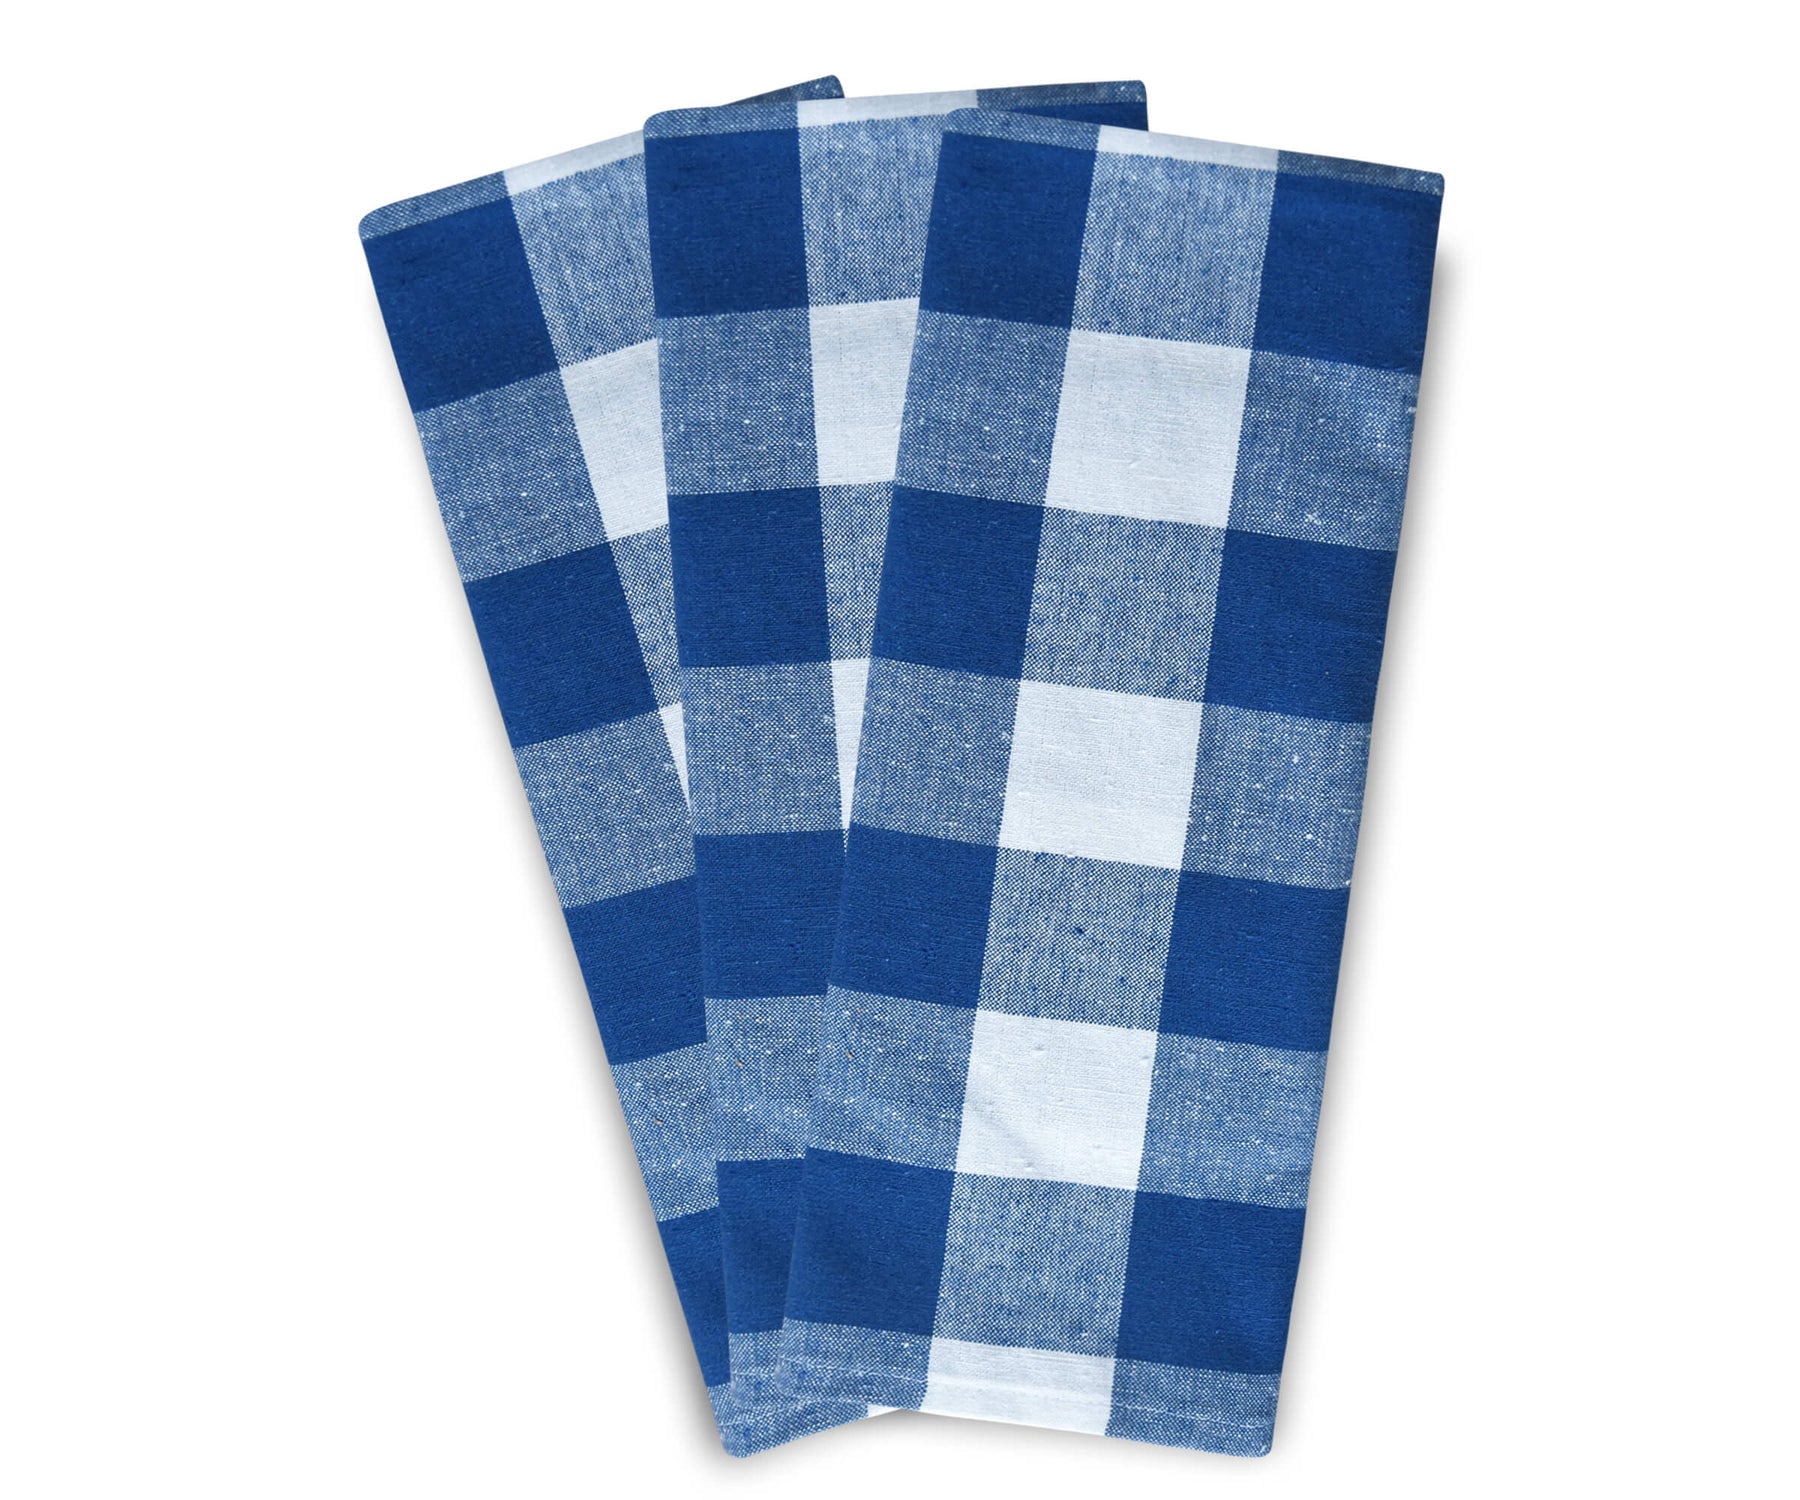 Blue towels are a classic choice for kitchens, adding a touch of color and style.